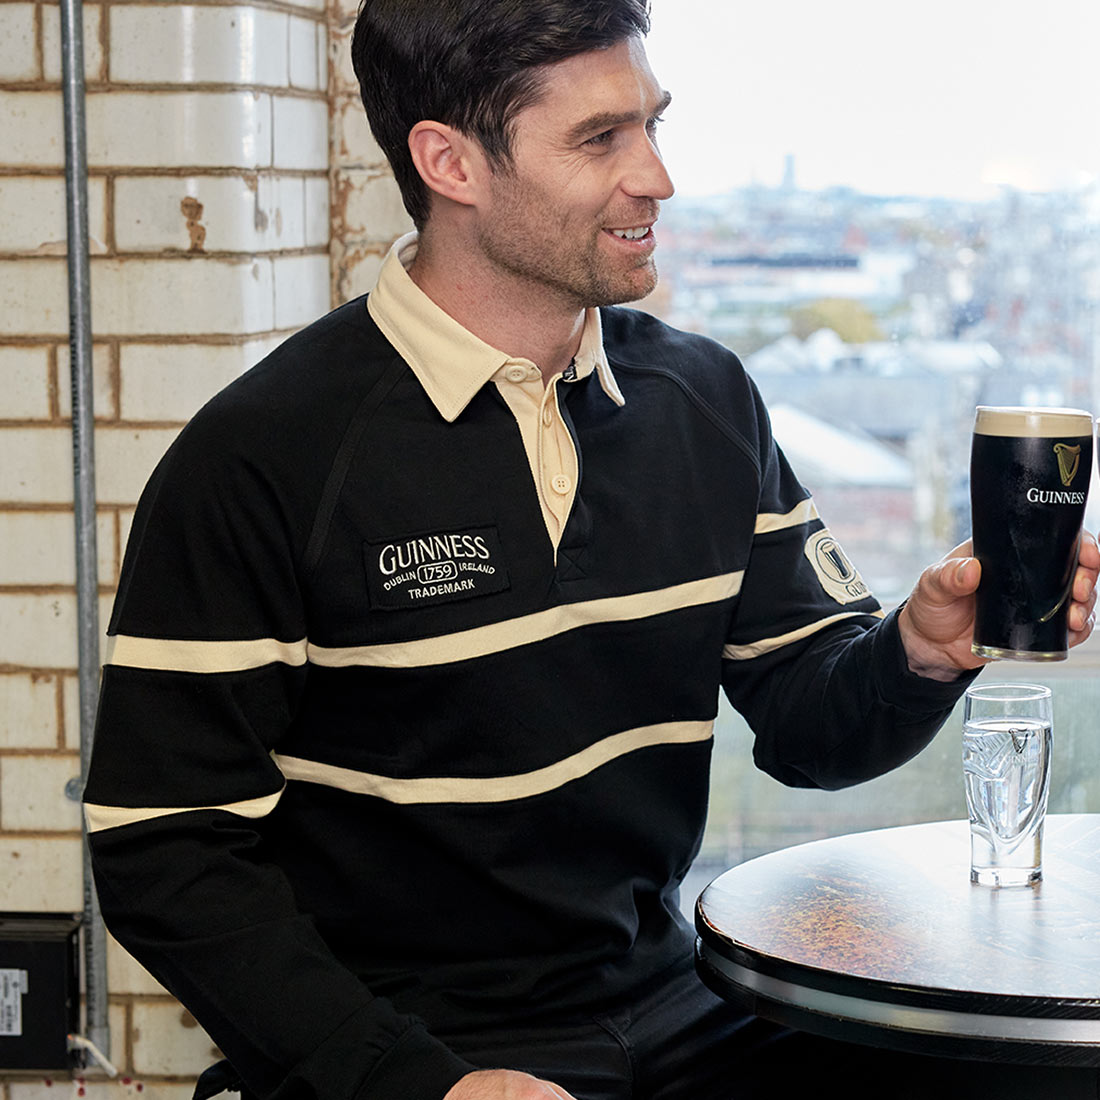 A man wearing a Guinness rugby jersey holding a pint of Guinness at a table.